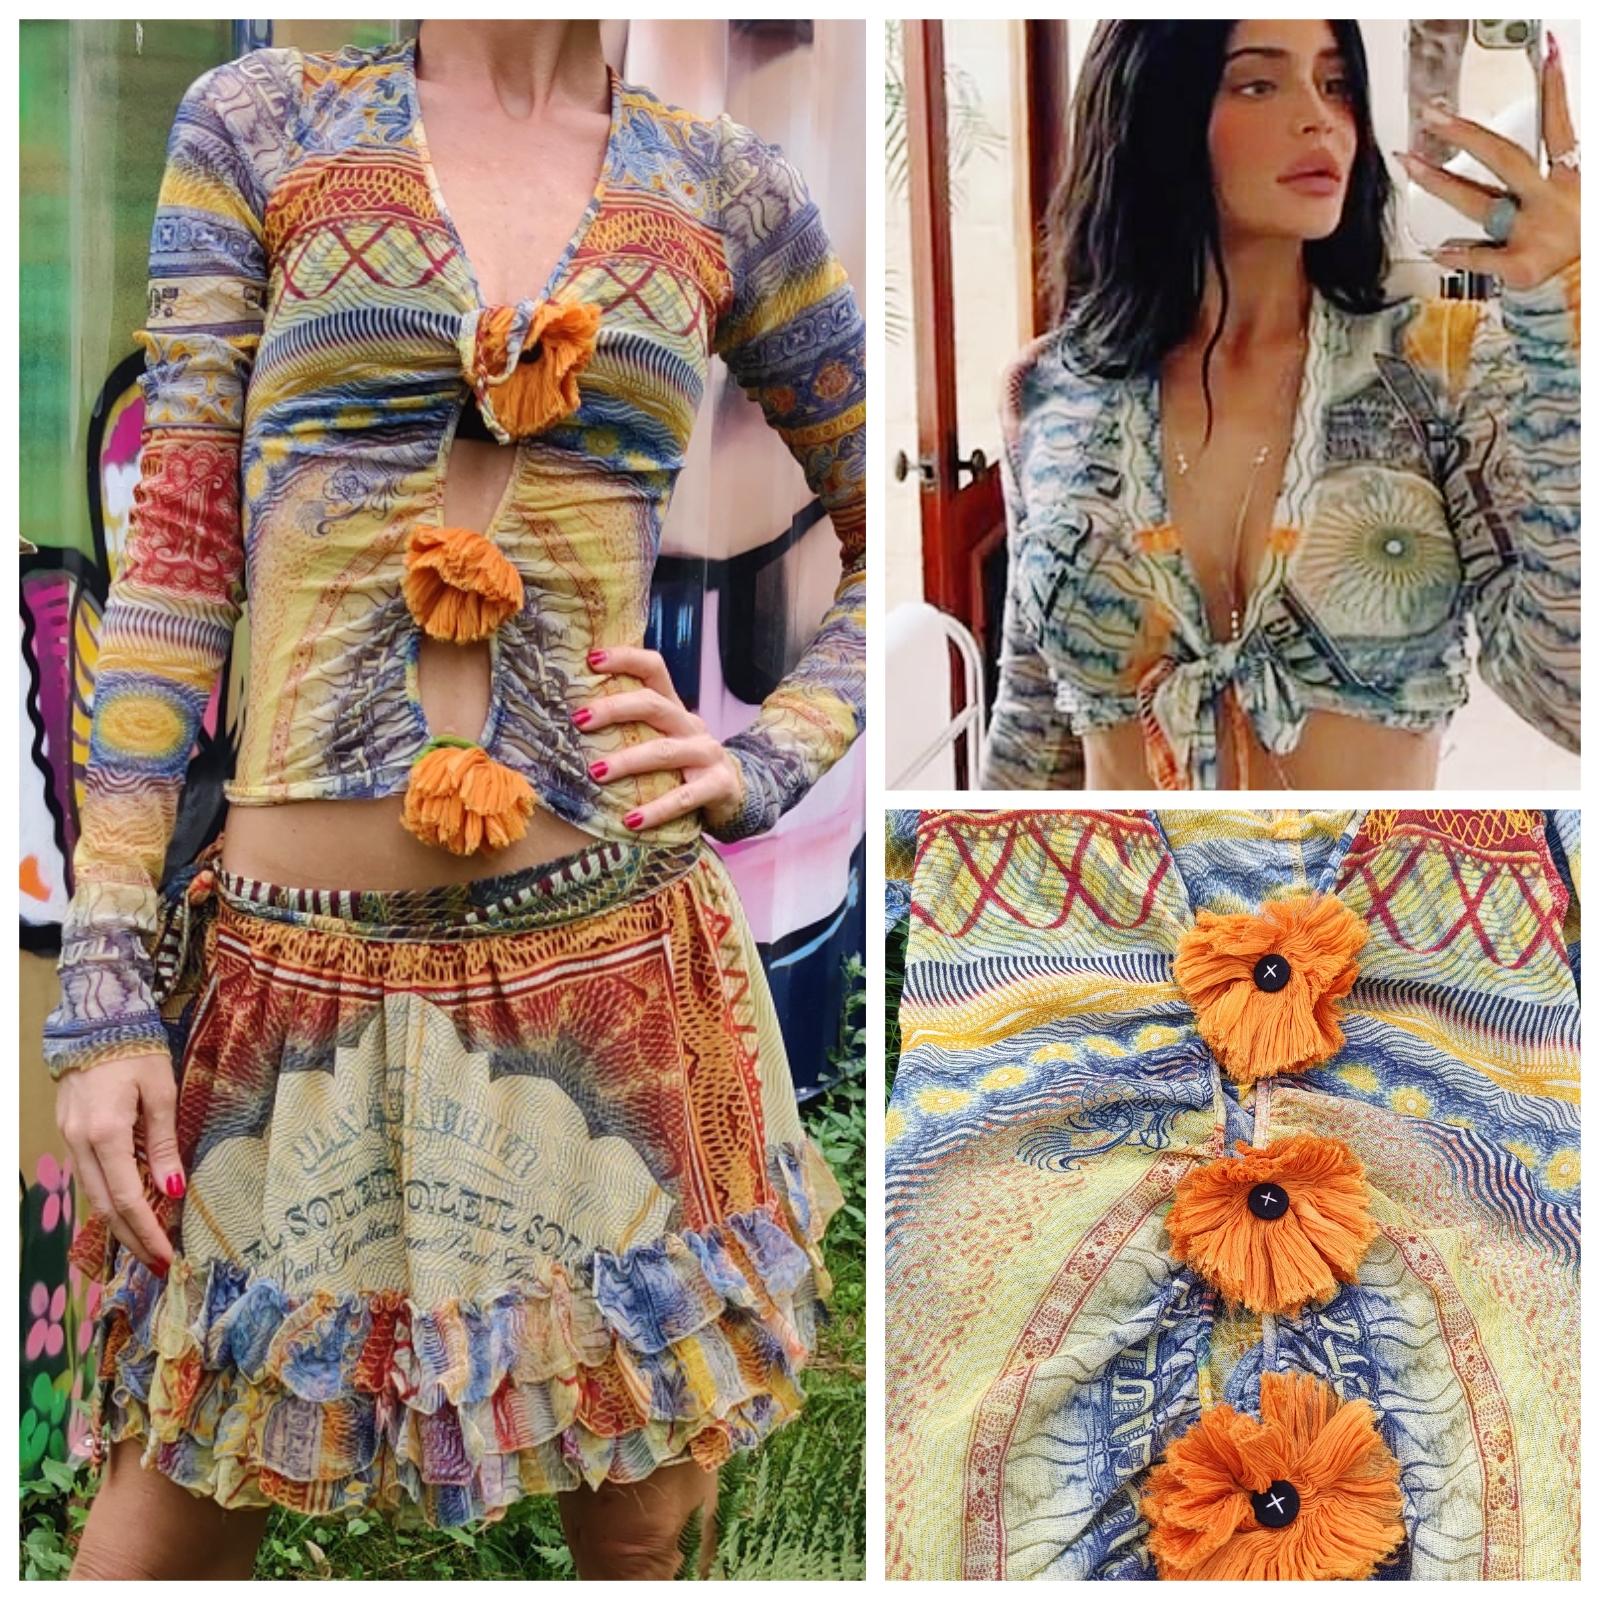 Iconic money print mesh dress by Jean Paul Gaultier!
Kendall Jenner worn the same pattern in her holiday. Check the photos :) 

Skirt + top!

VERY GOOD condition!

Open front! The top has 3 sunflower decorations, under the flowers there are buttom